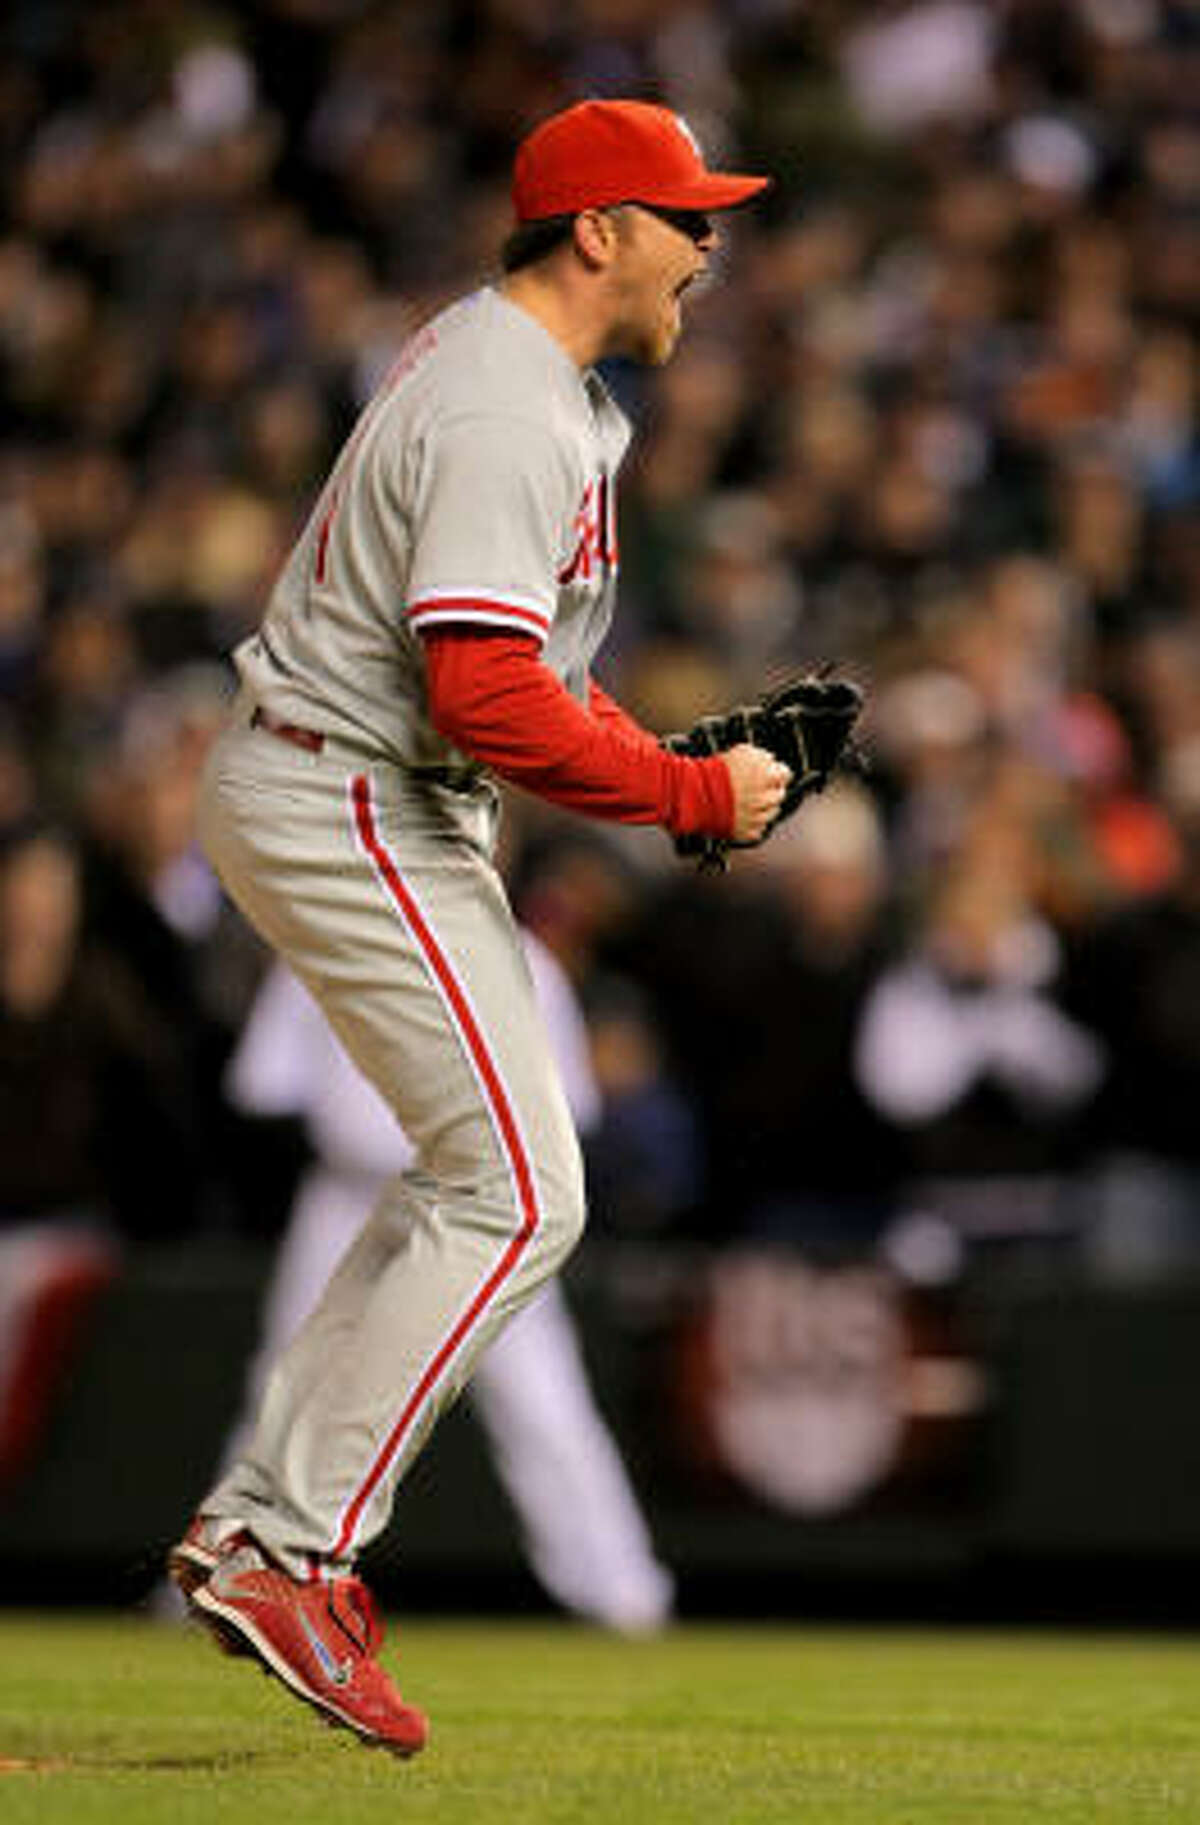 Game 4: Phillies 5, Rockies 4 Brad Lidge celebrates his second straight save and the Phillies' 3-1 series win over the Rockies.